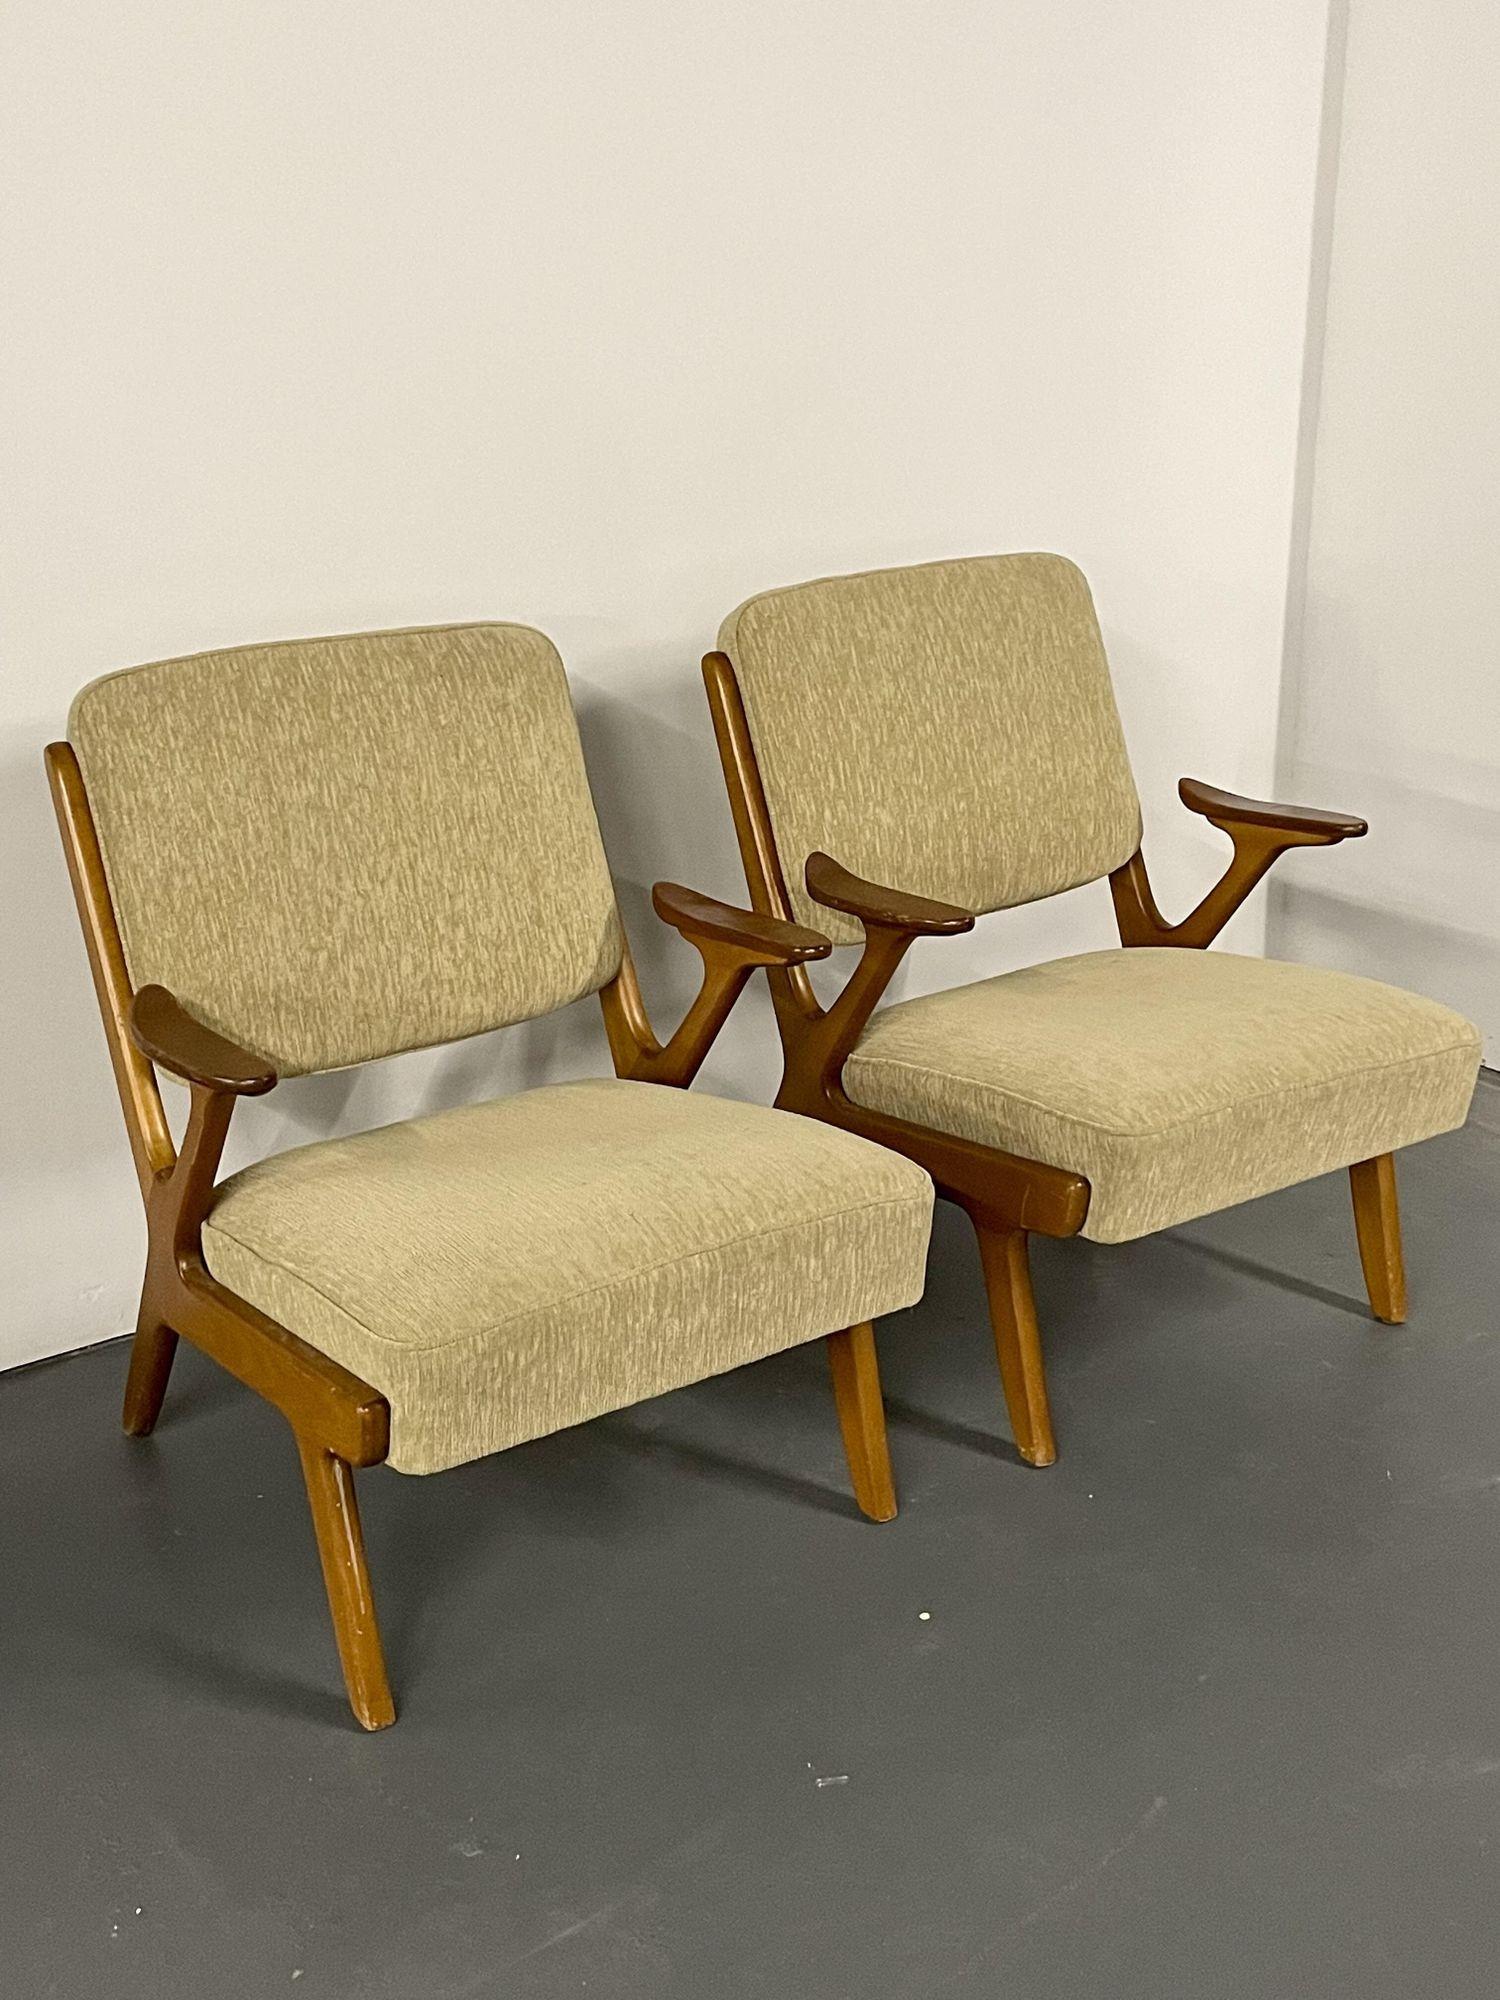 Pair of Mid-Century Modern easy / lounge chairs, Sweden, 1960s. 
 
Unique organic form Swedish designer lounge or arm chairs from the 1960s for Swedish manufacturer Svegards Makaryd.
 
Other Scandinavian designers of the period include Finn Juhl,